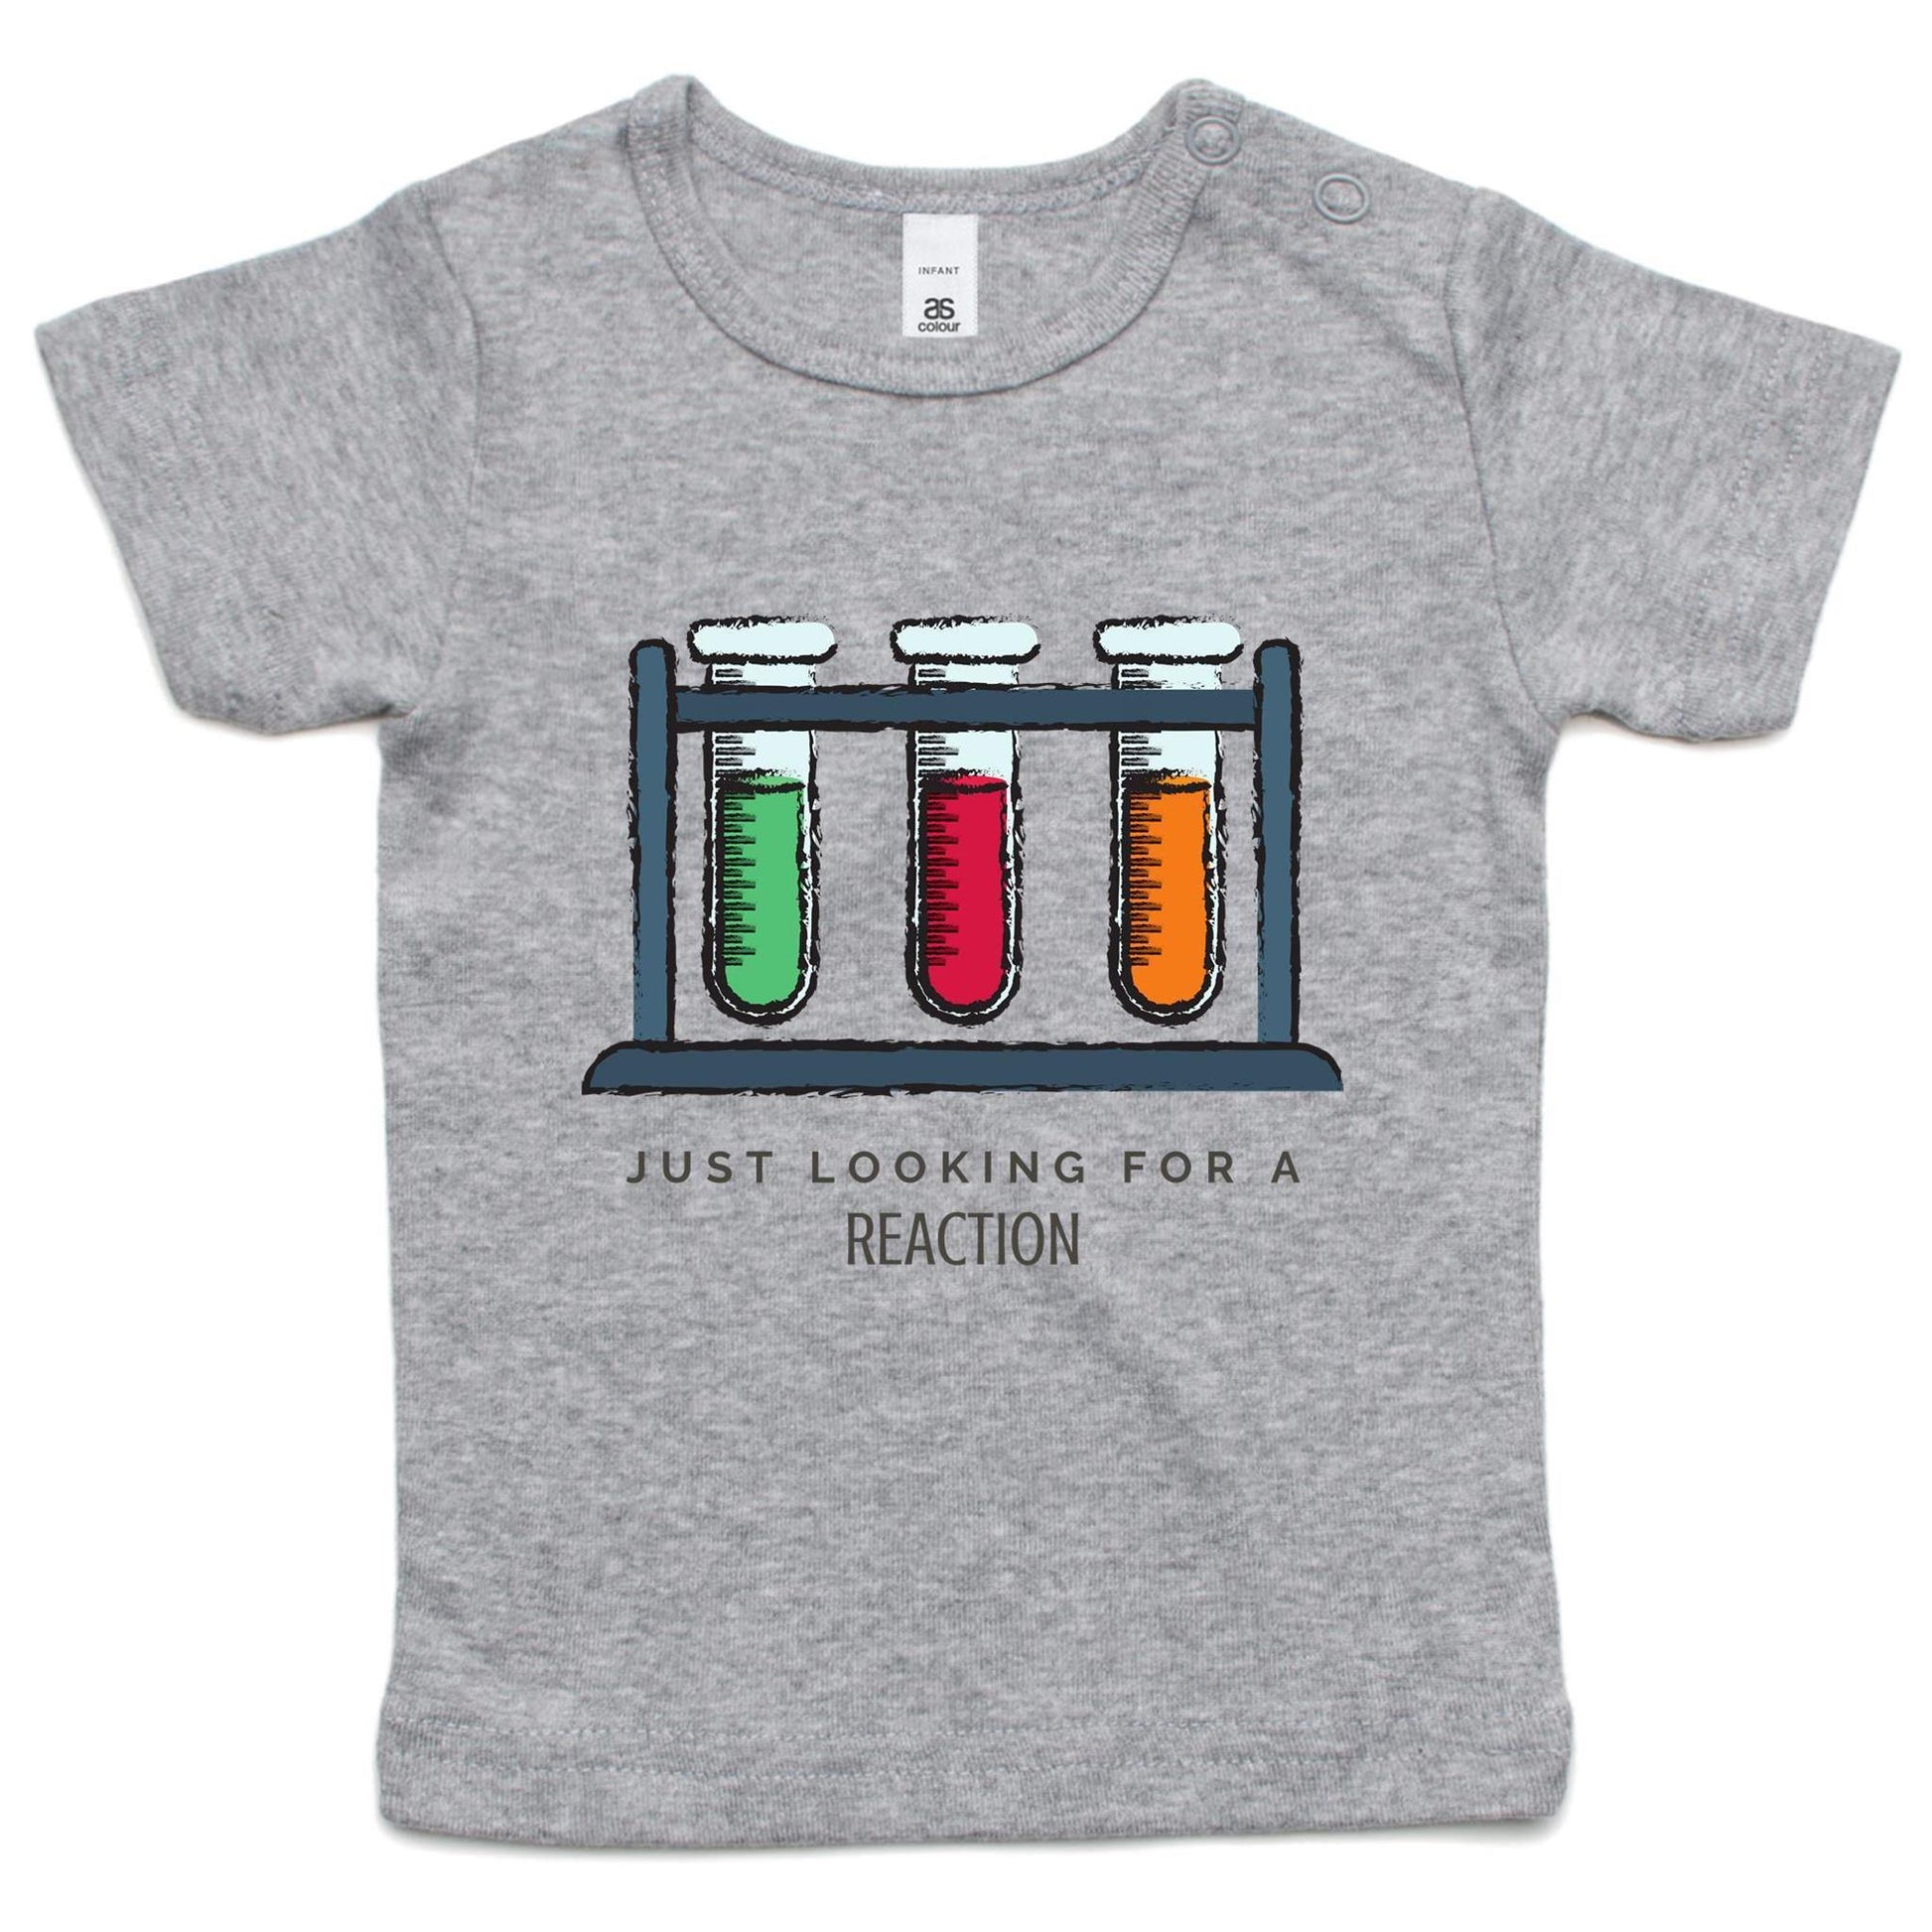 Test Tube, Just Looking For A Reaction - Baby T-shirt Grey Marle Baby T-shirt kids Science